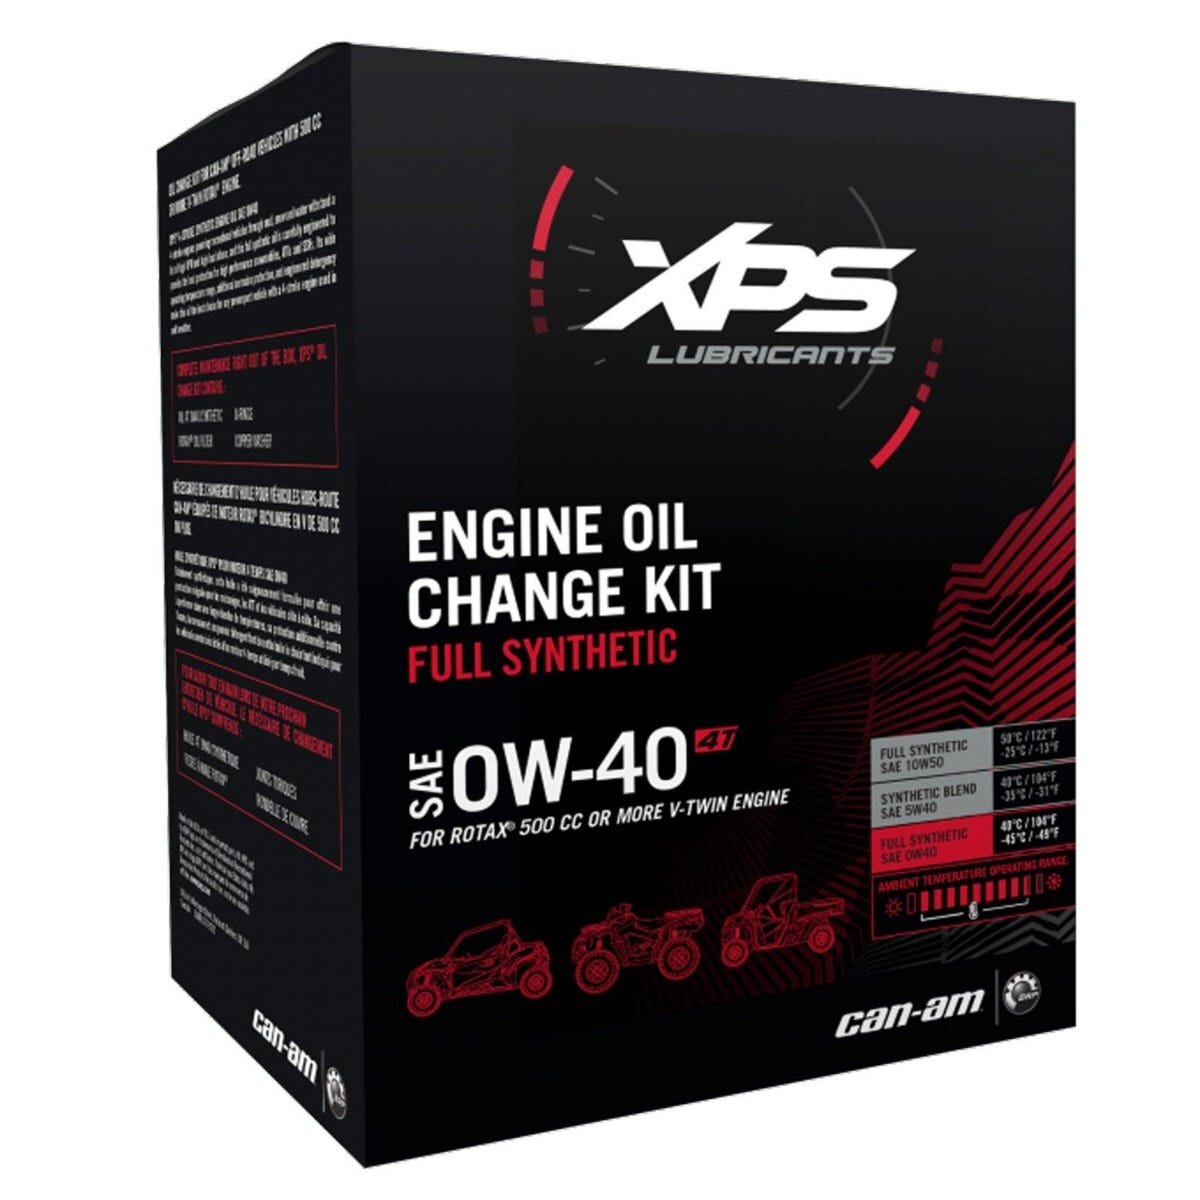 4T 0W 40 Synthetic Oil Change Kit for Rotax 500 cc or more V Twin engine